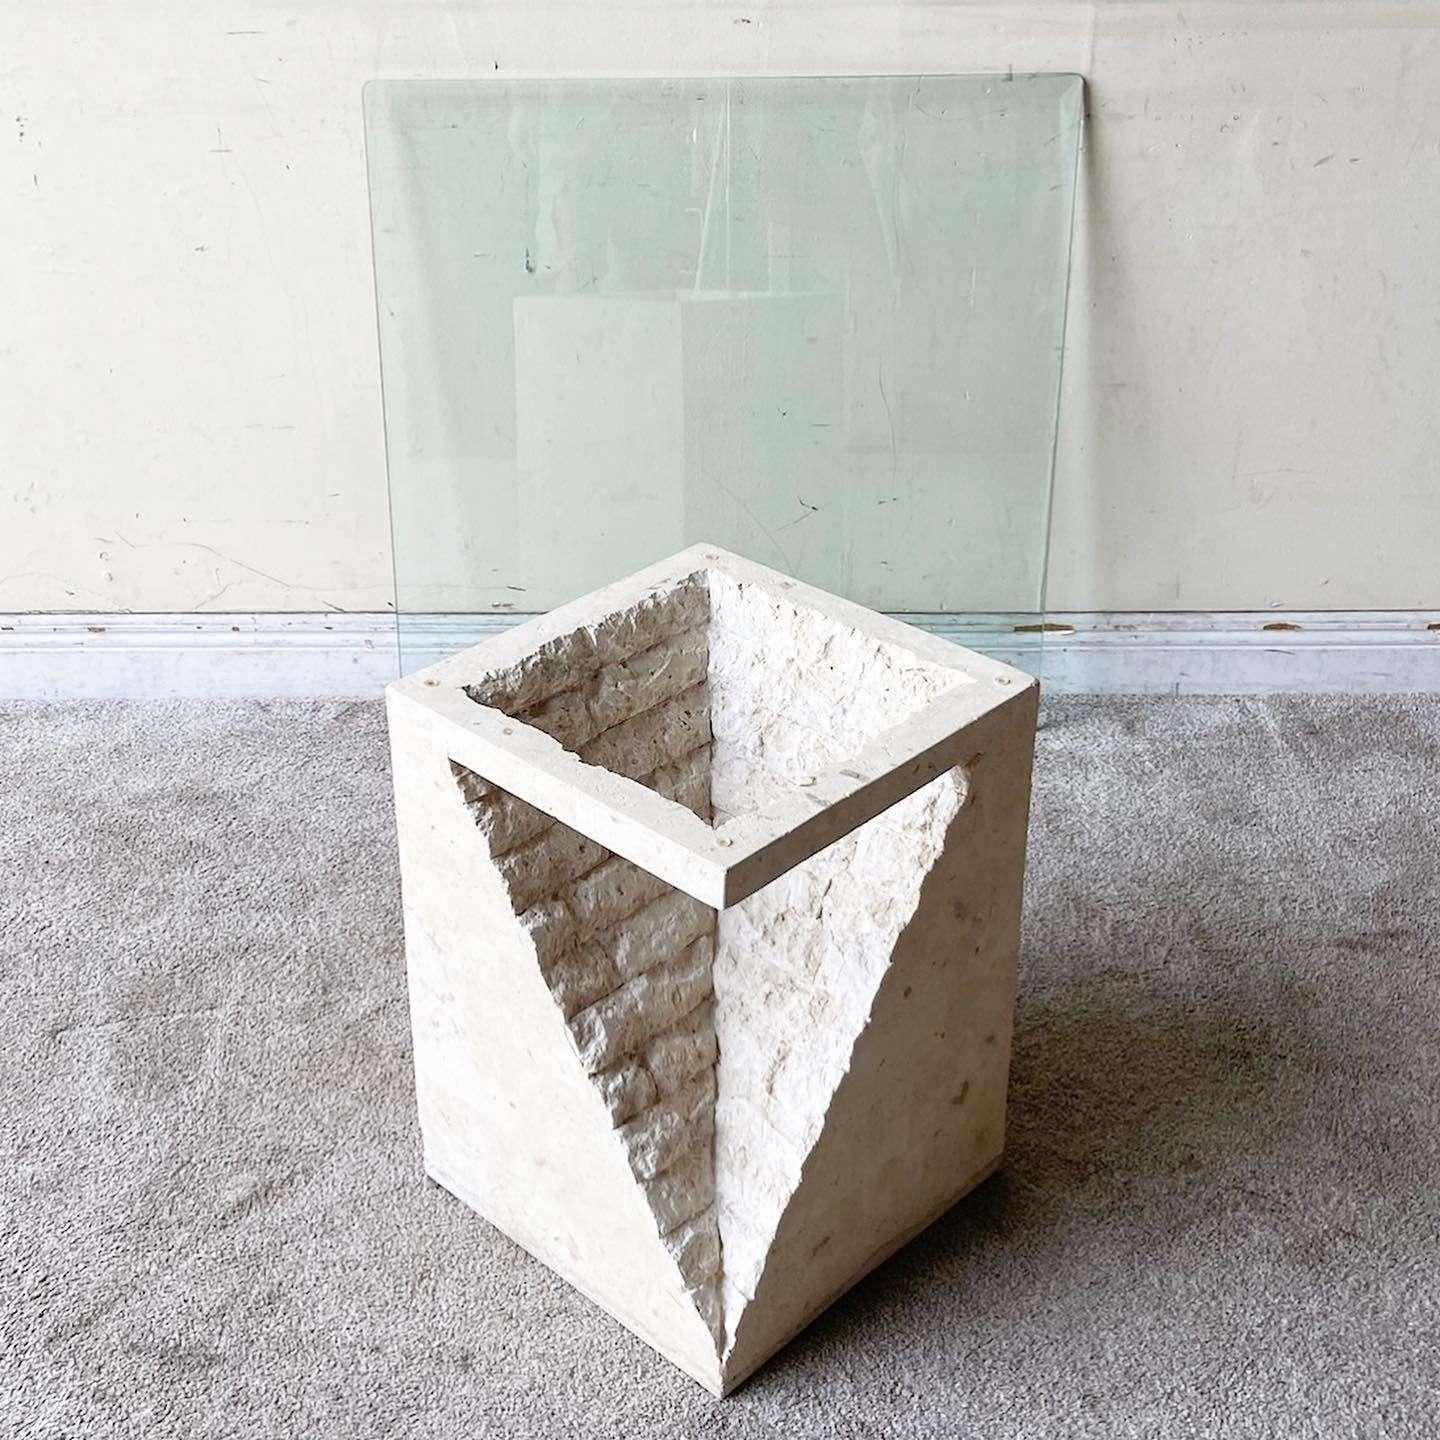 Excellent vintage postmodern sculpted tessellating mactan stone side table. Features polished sides with a raw interior and a square beveled glass top.